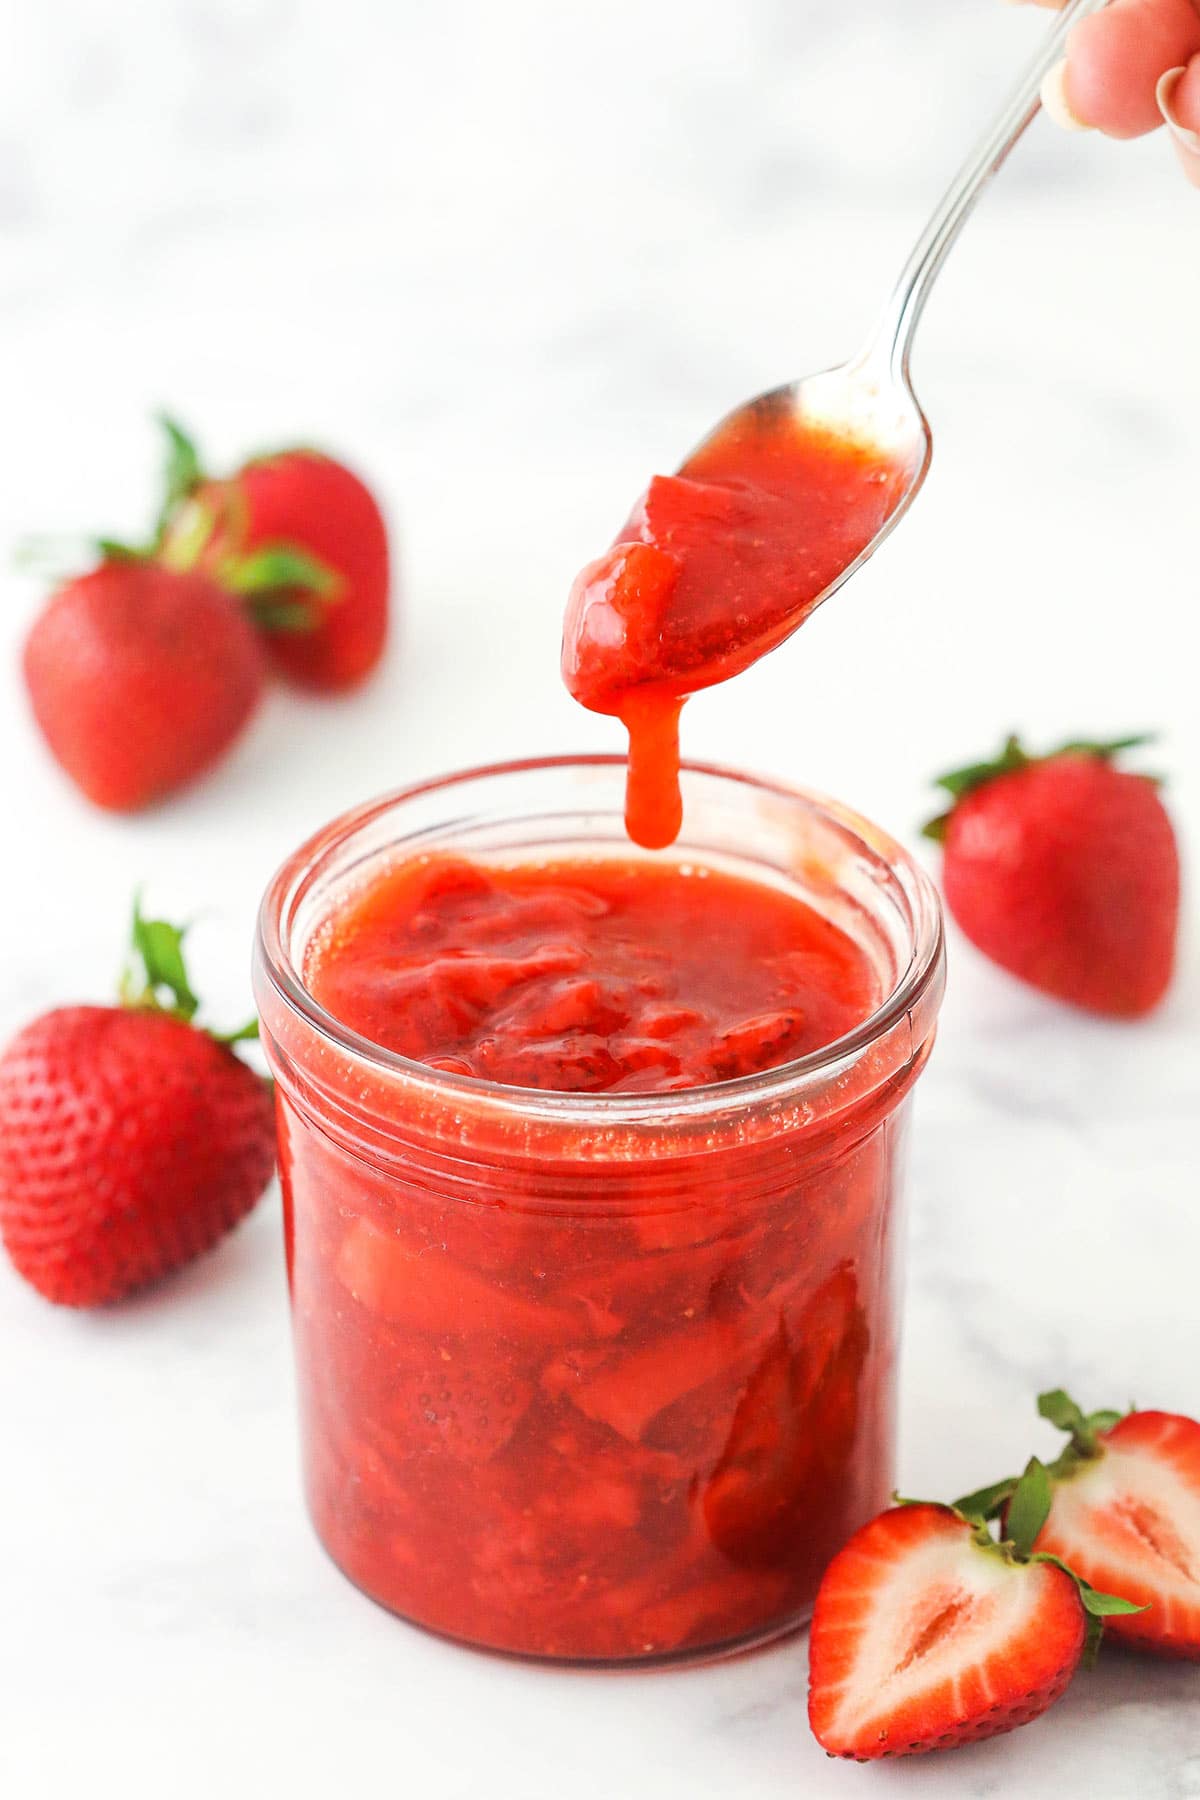 chunky strawberry sauce dripping off a spoon into clear jar